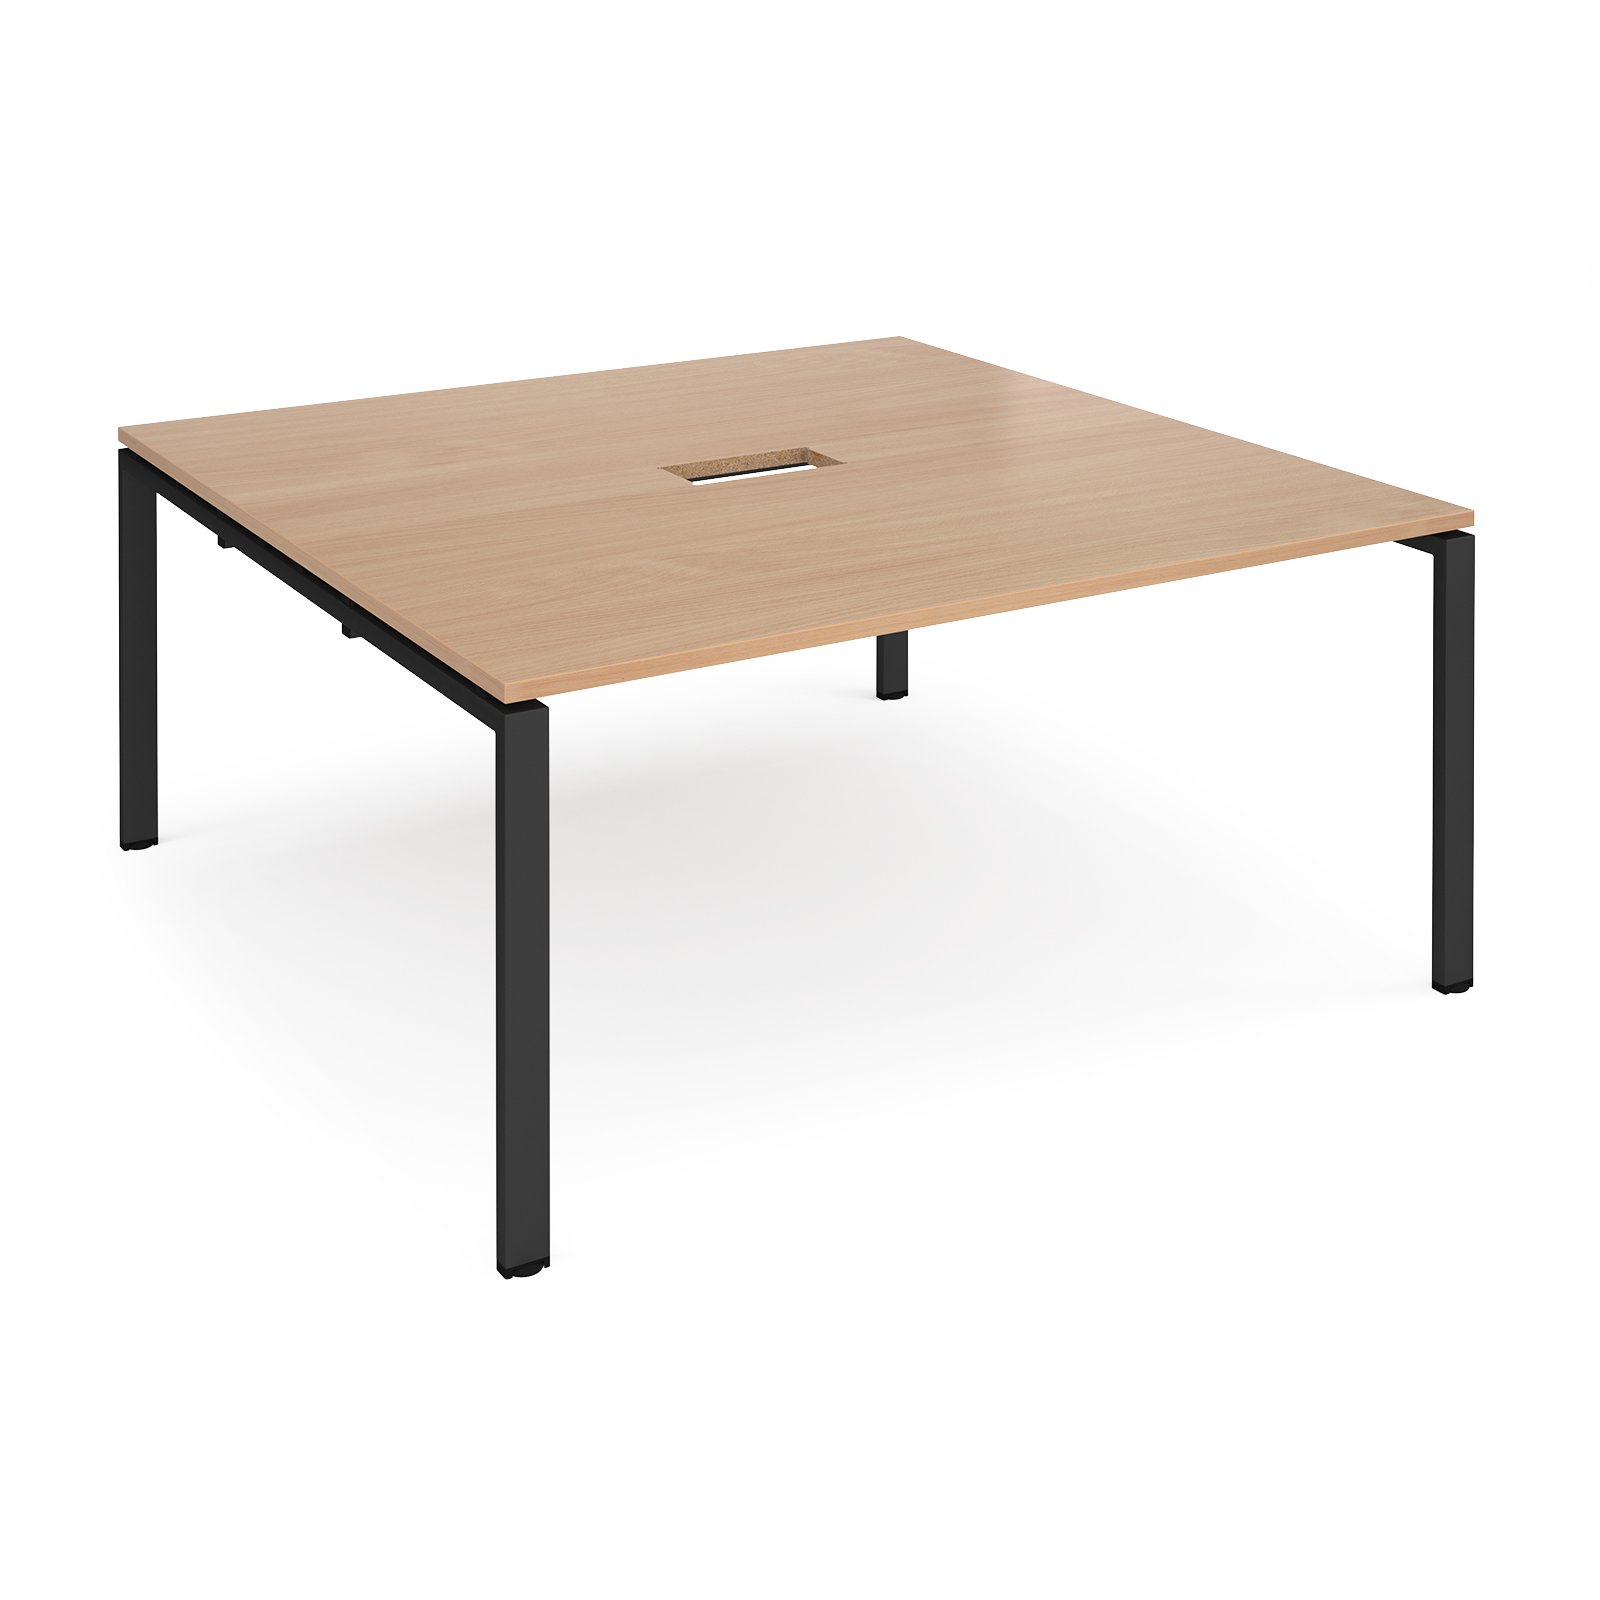 Adapt square boardroom table 1600mm x 1600mm with central cutout 272mm x 132mm - black frame, beech top